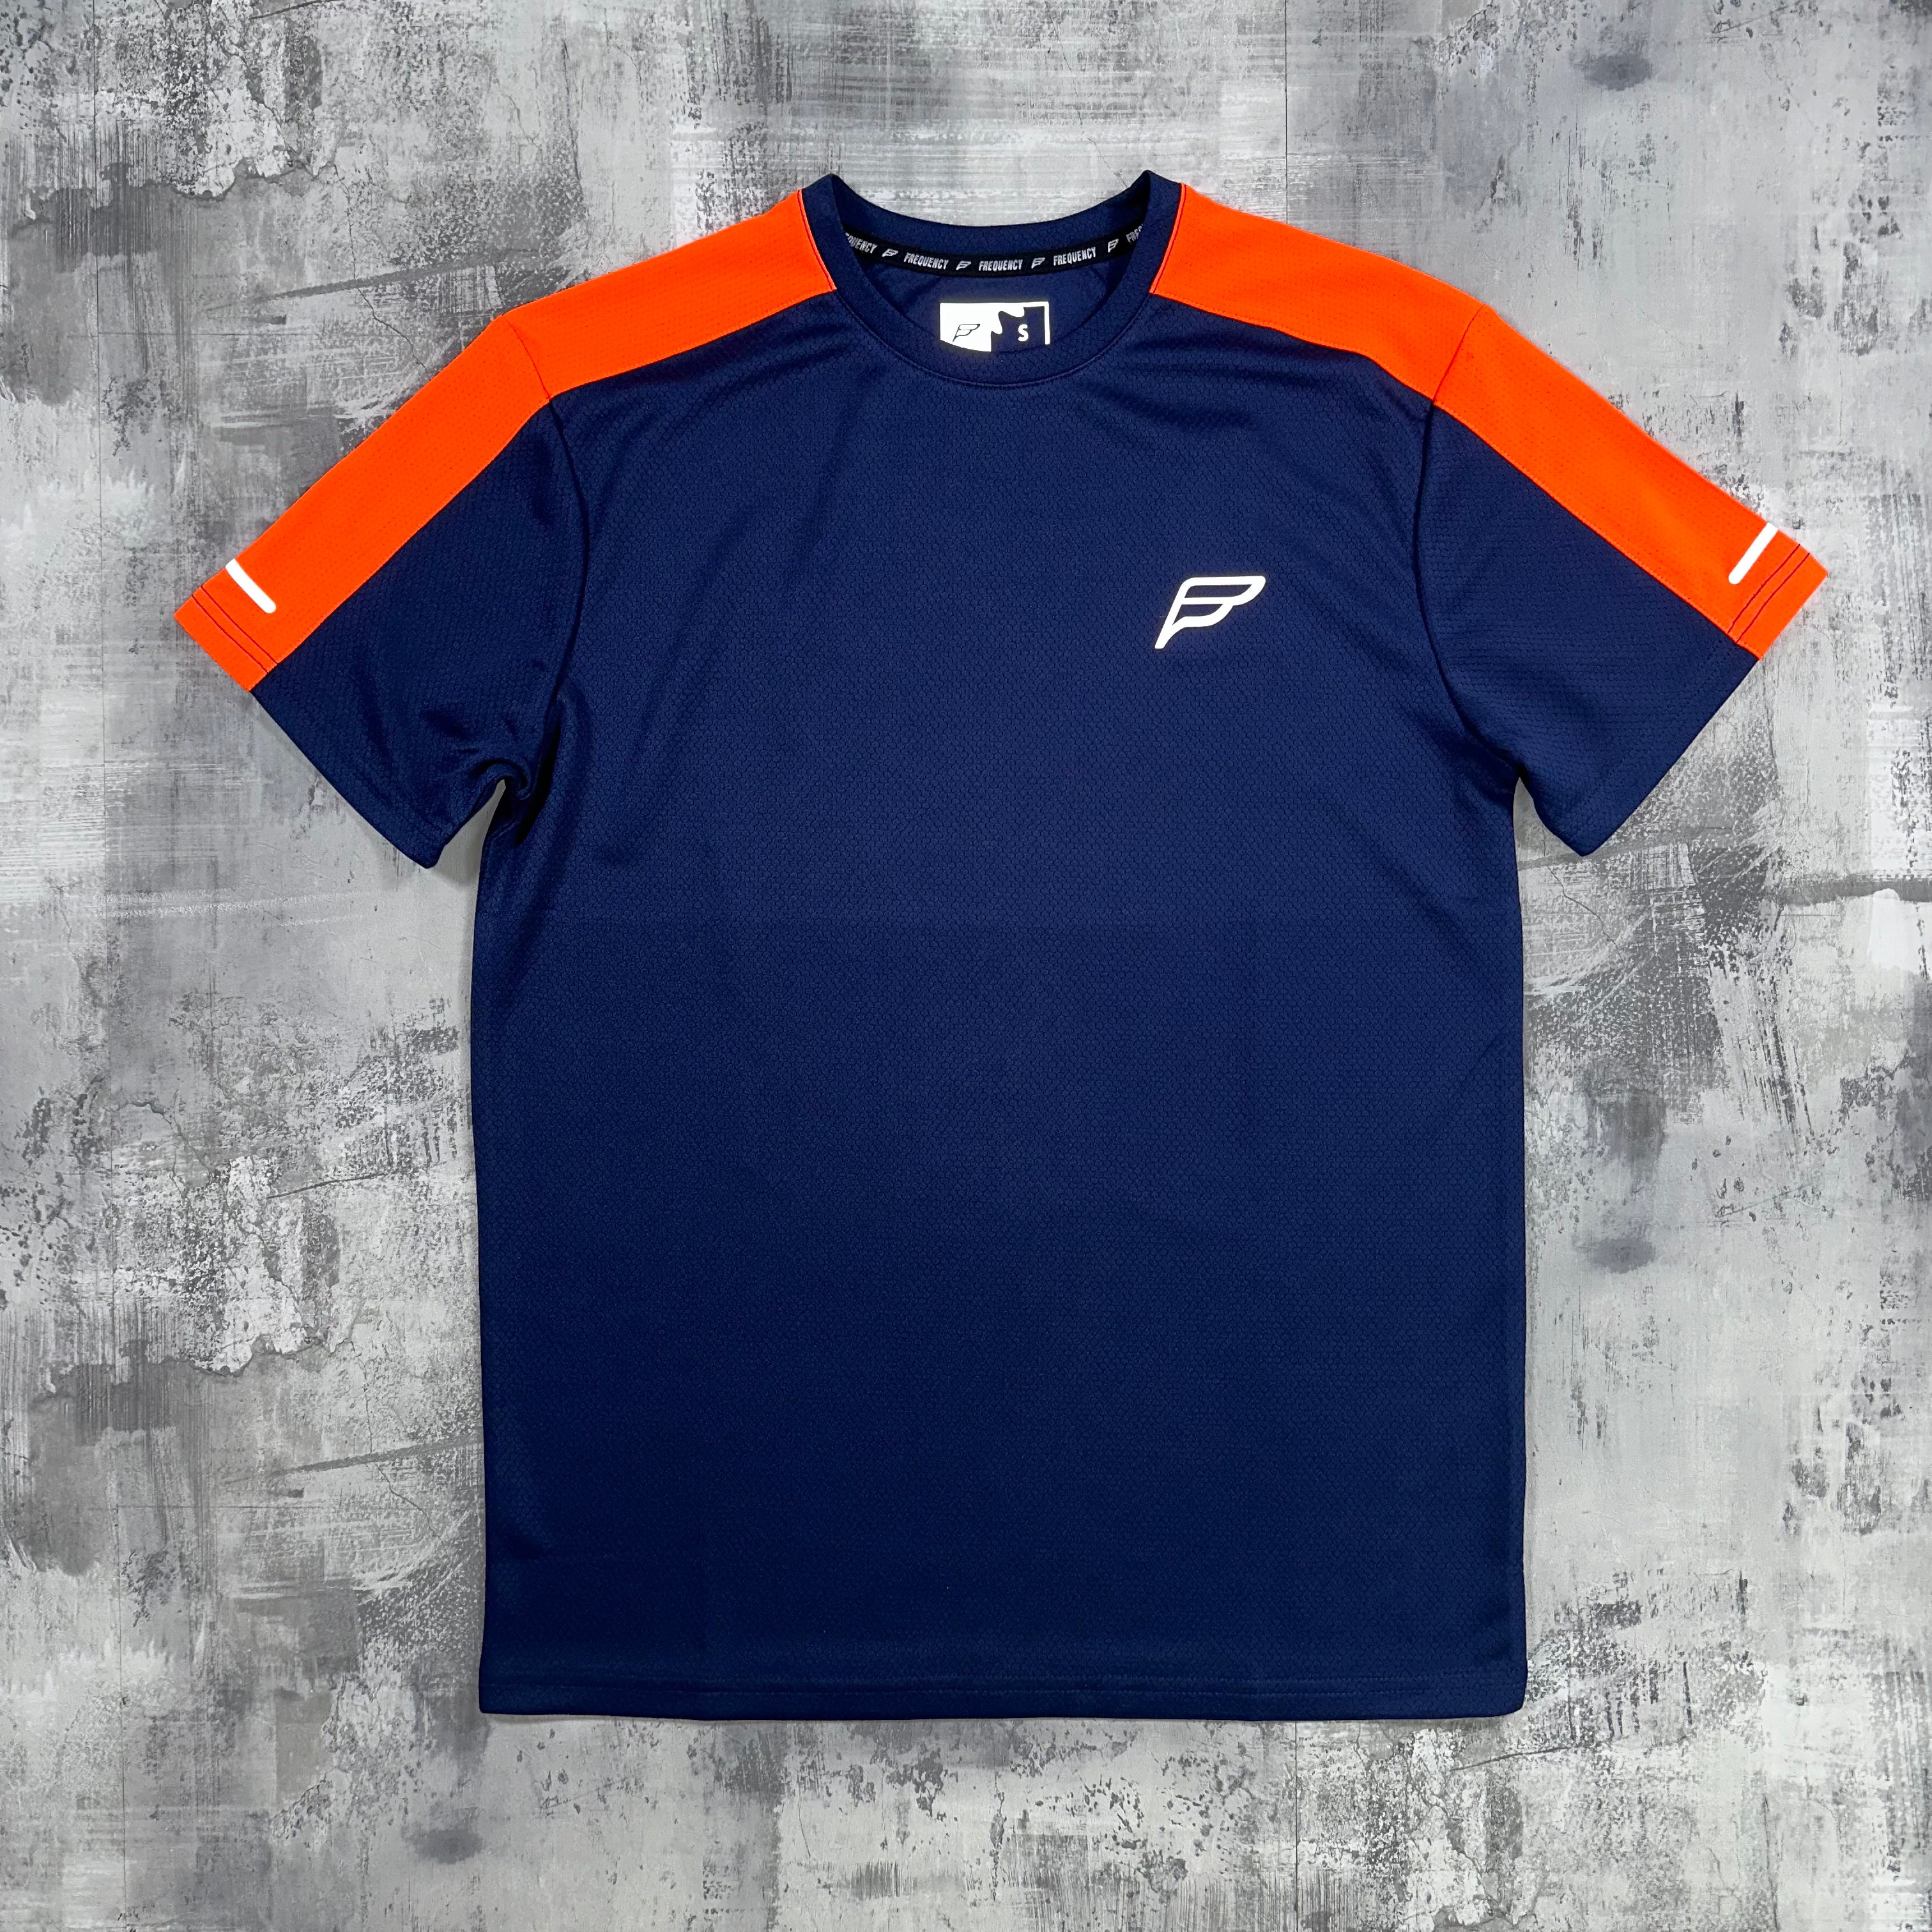 Frequency Perform Pro t-shirt Navy